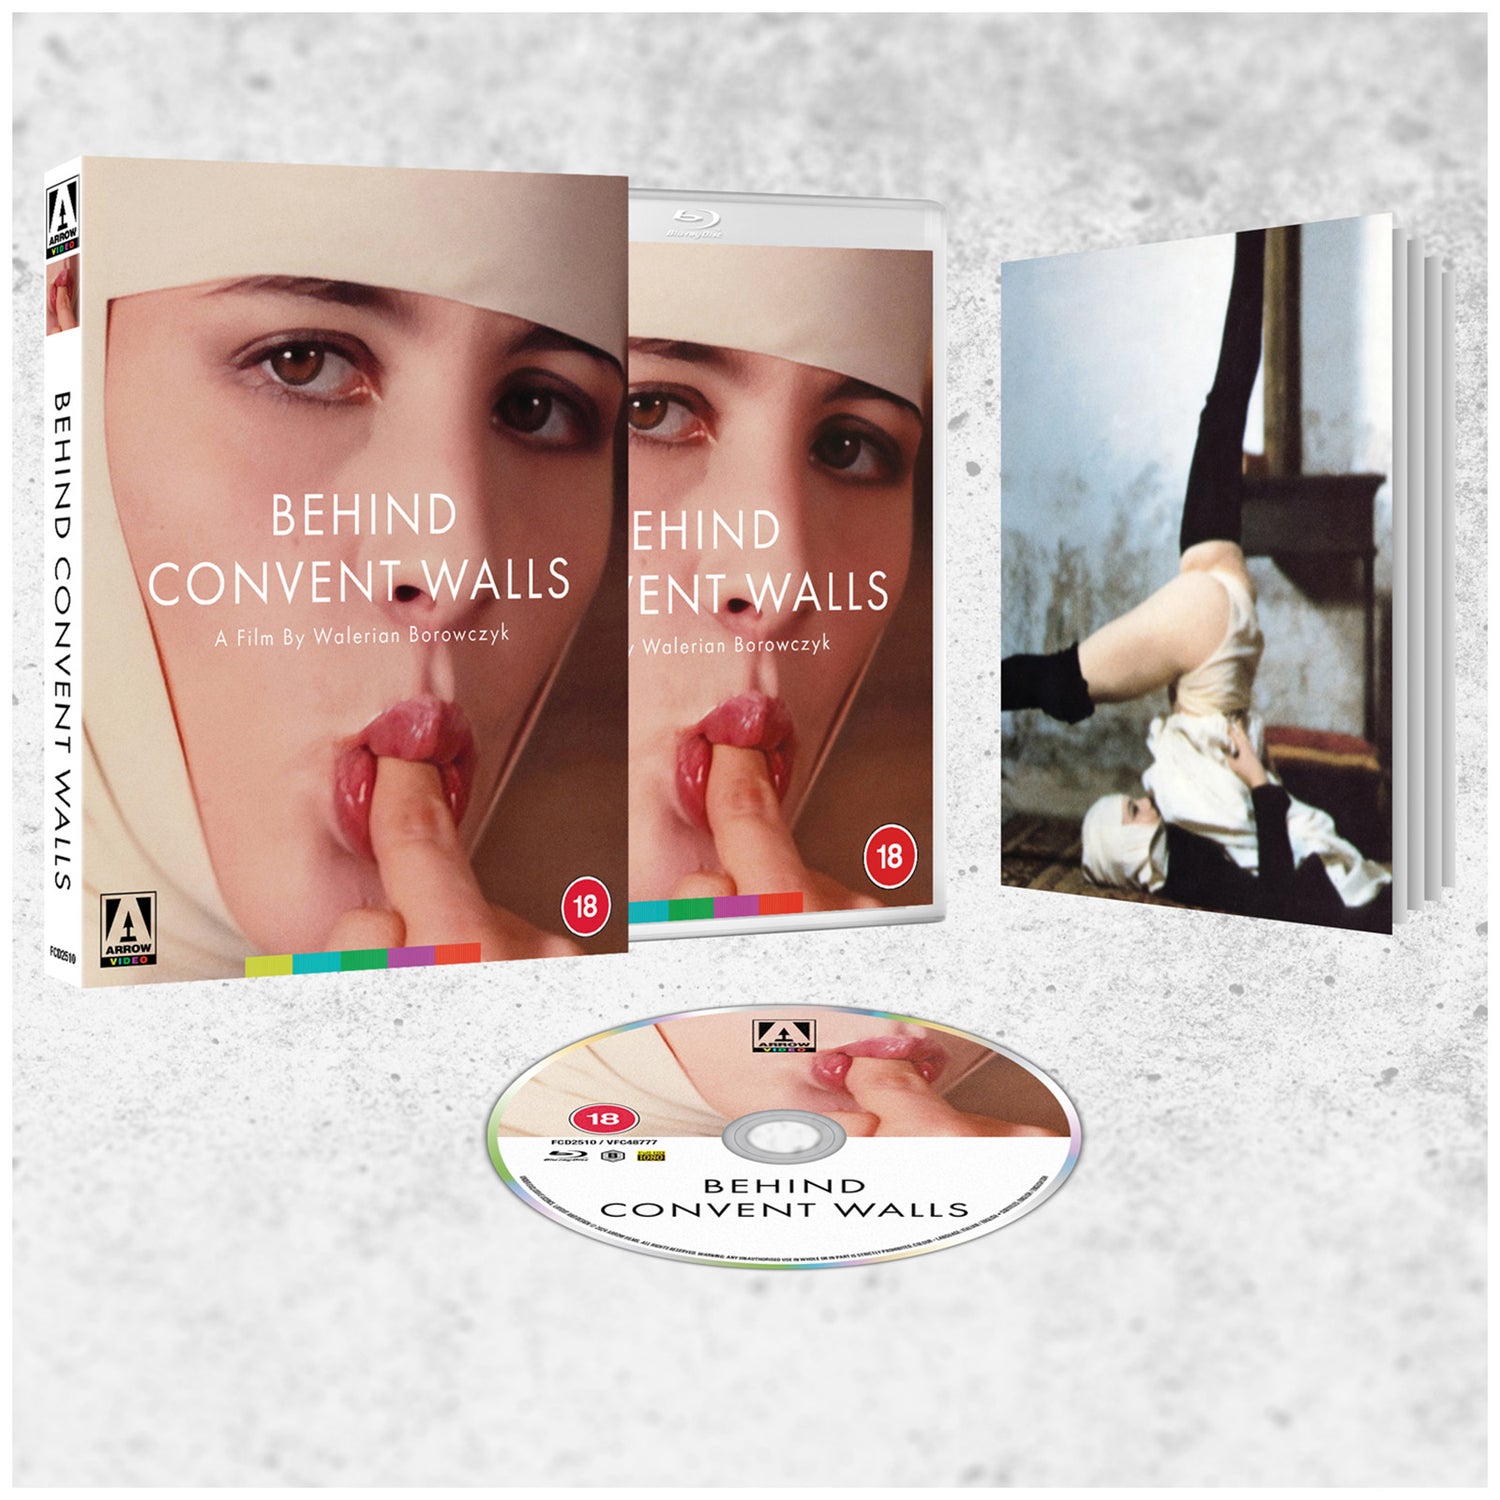 Behind Convent Walls Limited Edition Blu-ray